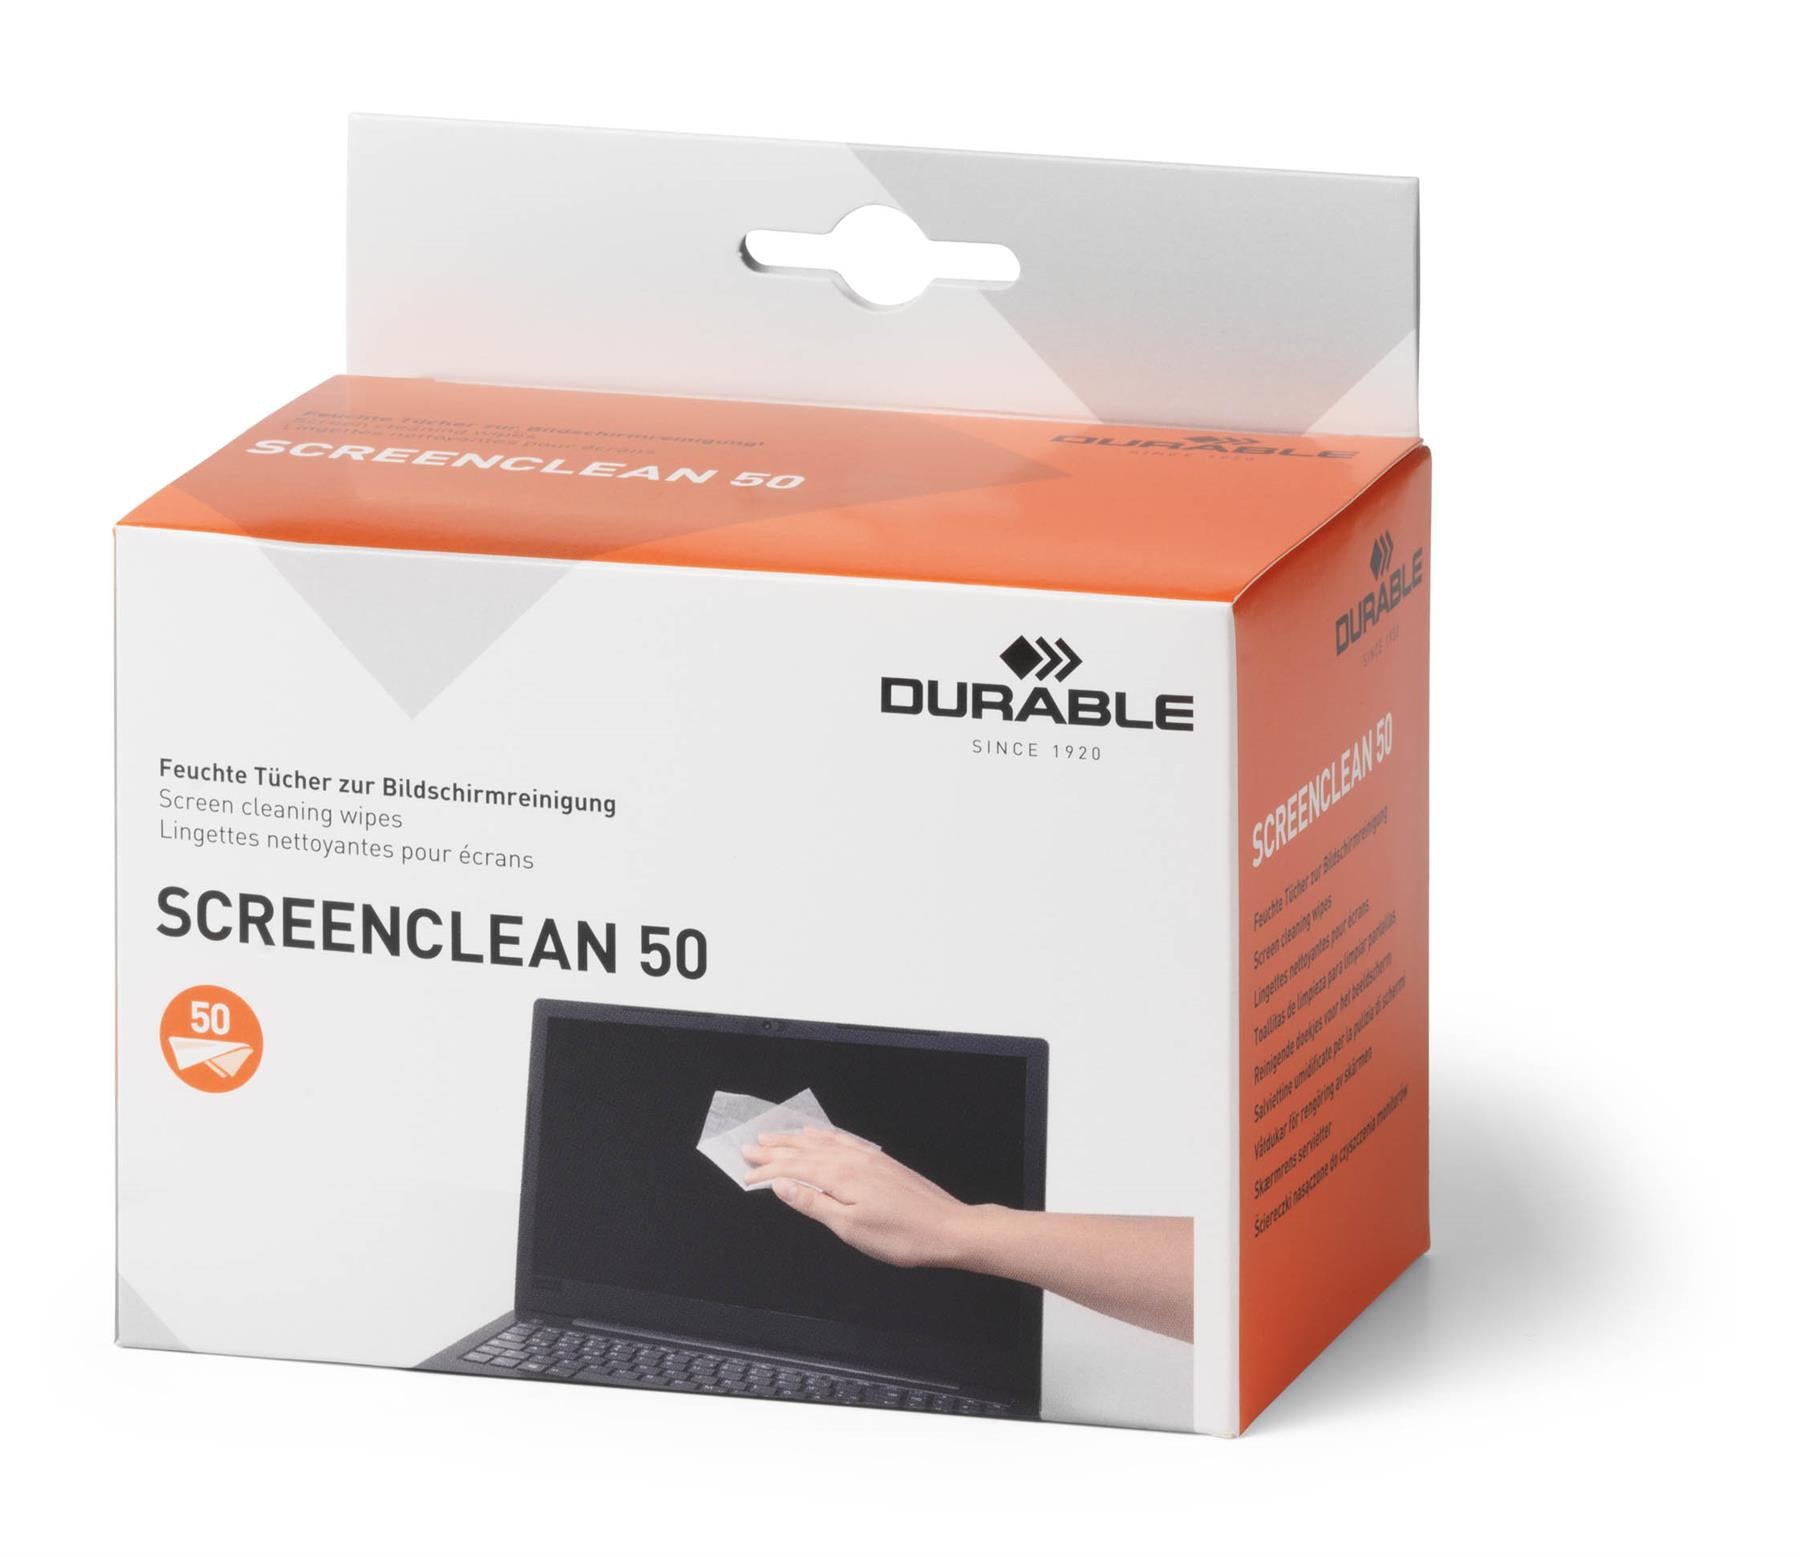 Durable SCREENCLEAN Streak-Free Biodegradable Screen Cleaning Wipes | 50 Sachets